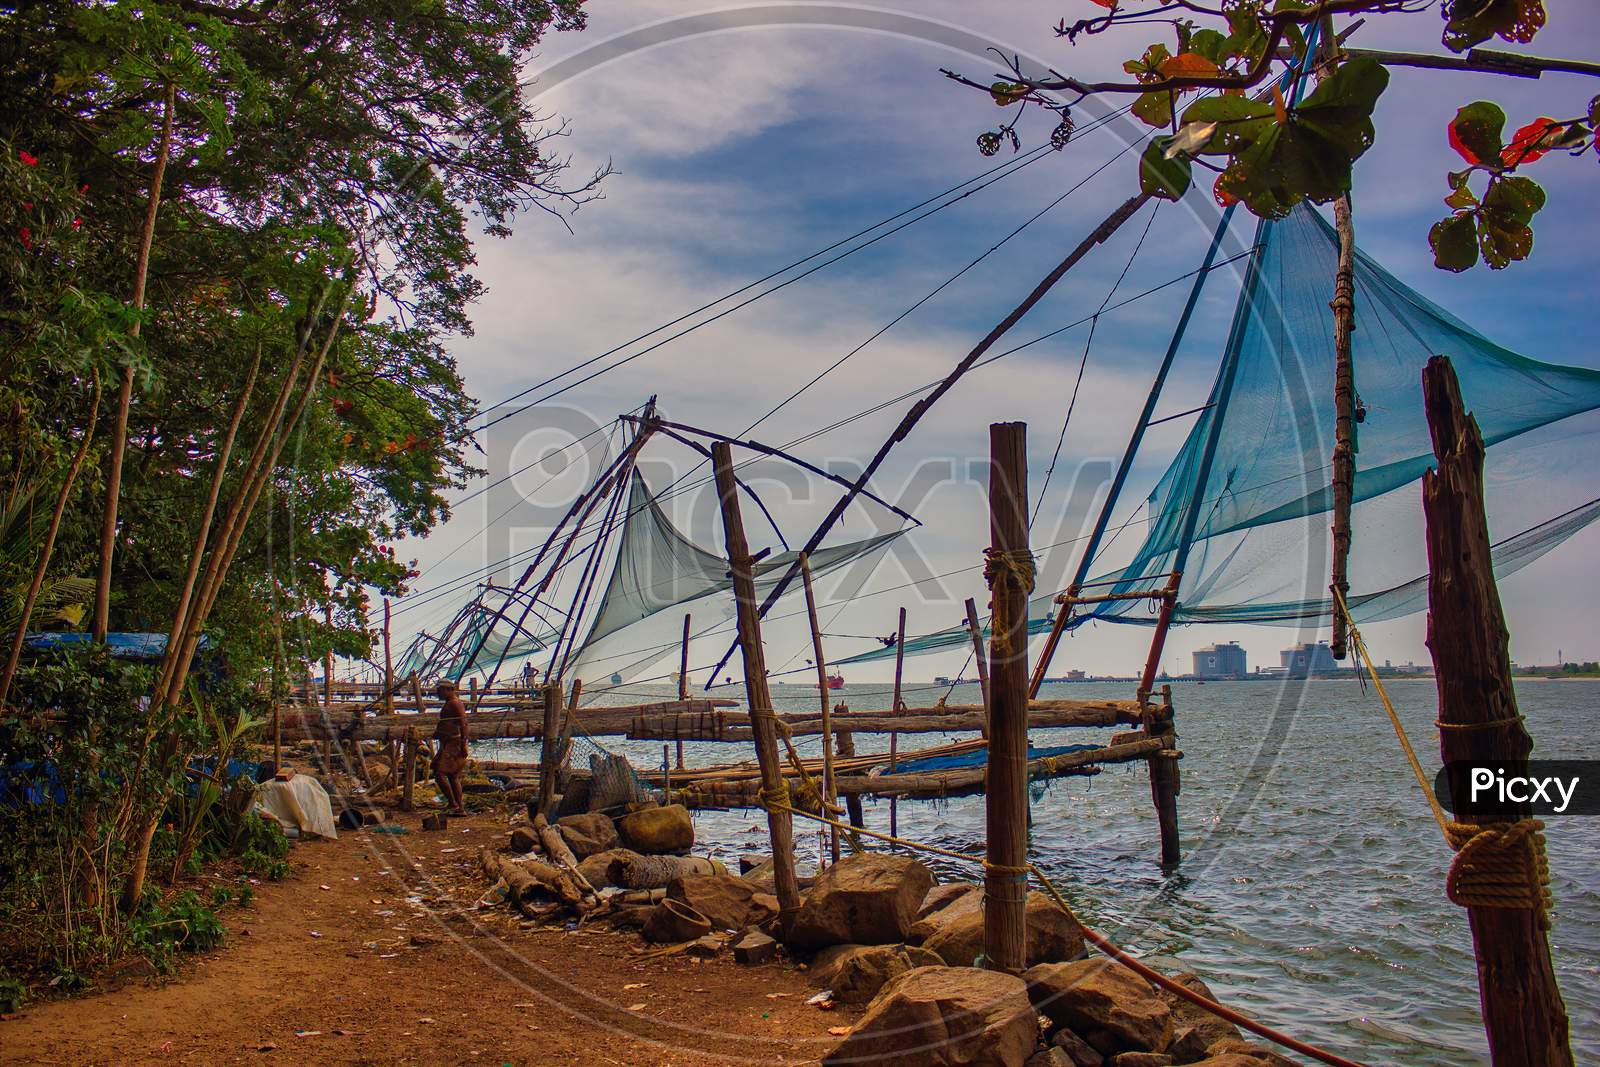 Image of A Chinese Net To Catch Fish In Cochin City, Located In Kerala  State, India-UG159167-Picxy